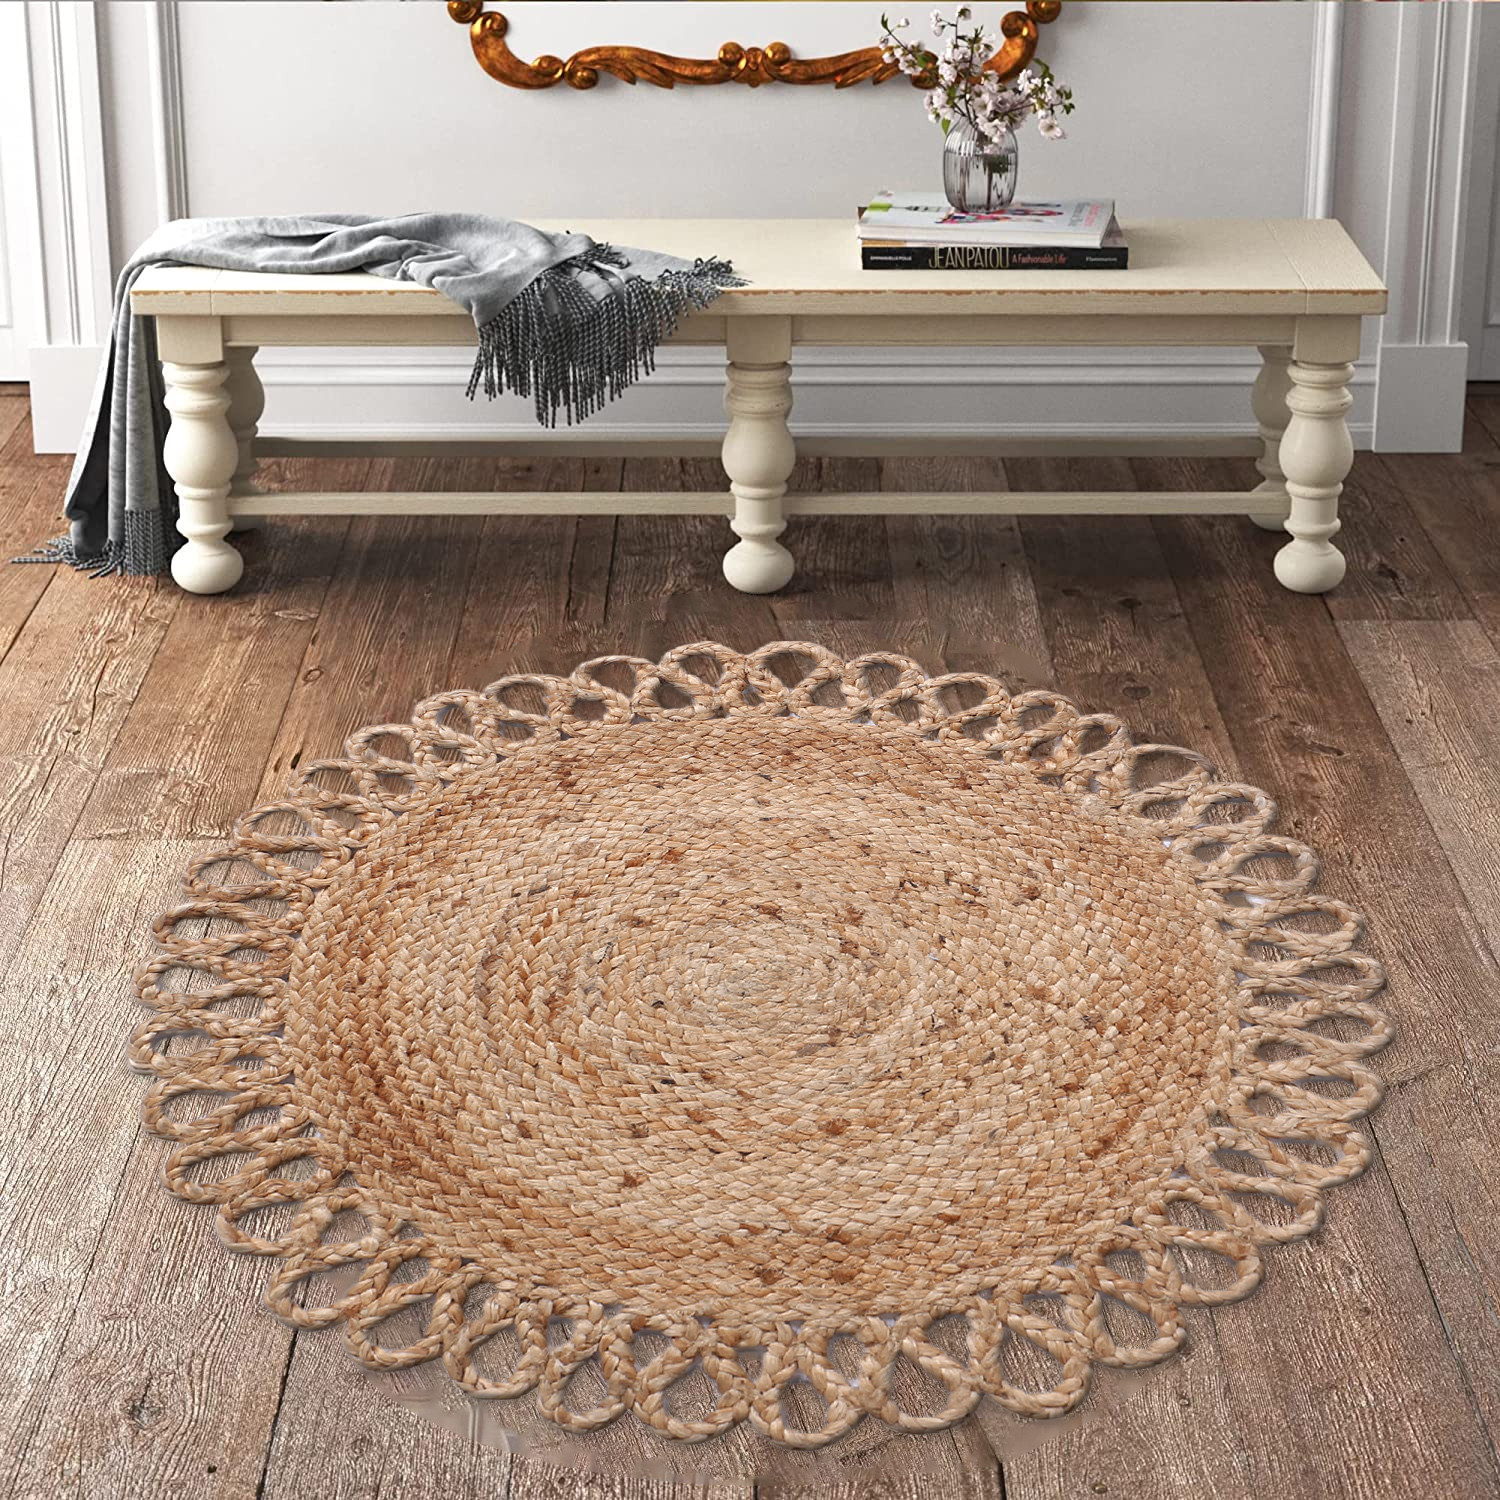 Kuber Industries Hand Woven Carpet Rugs|Natural Stitch Braided Jute Door mat|Round Shape Mat For Bedroom,Living Room,Dining Room,Yoga,72x72 cm,(Brown)